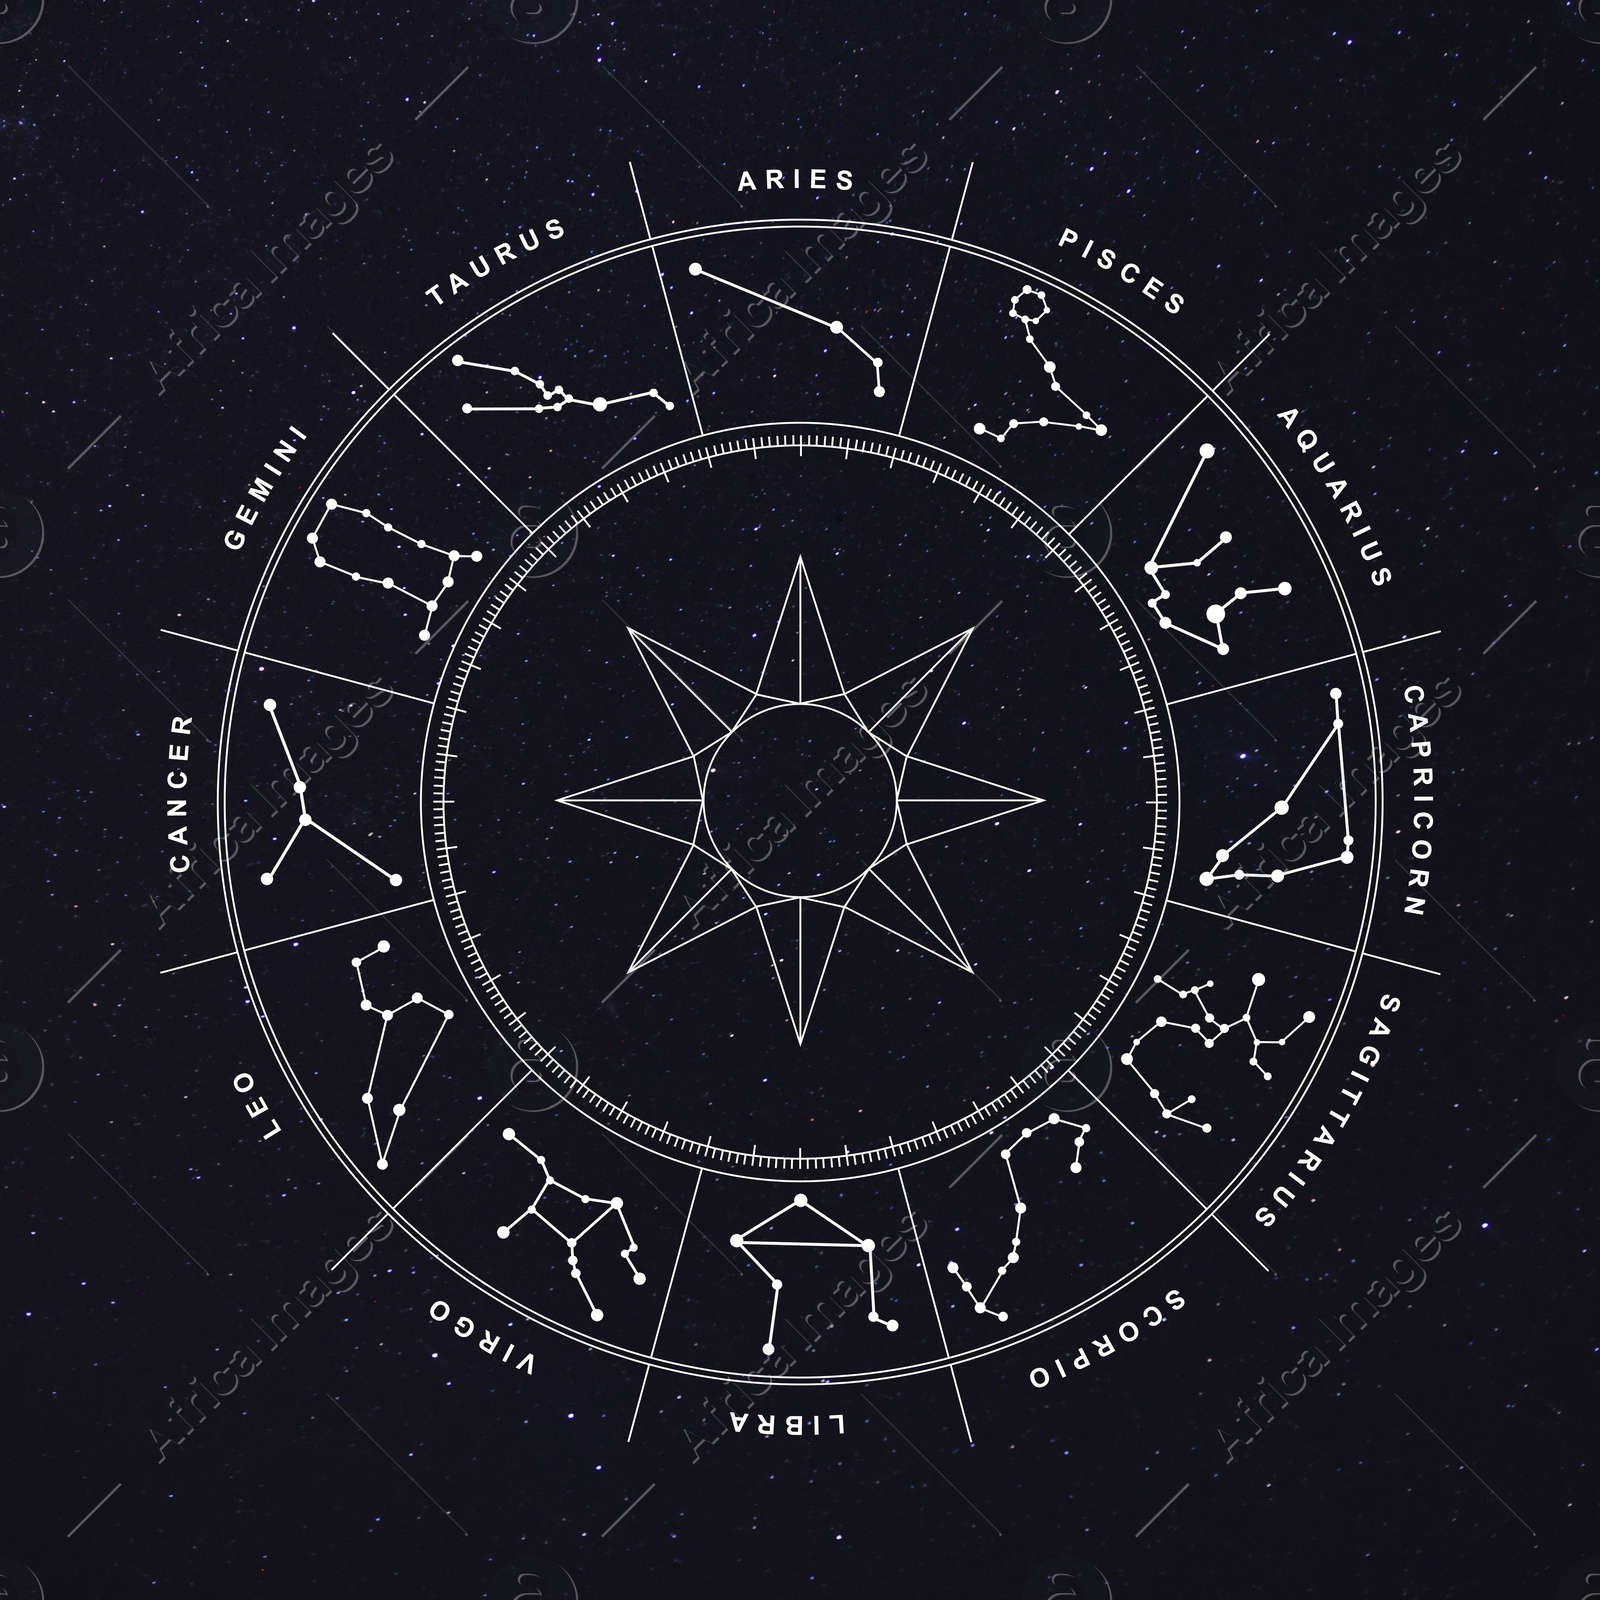 Illustration of Zodiac wheel with astrological signs against starry night sky